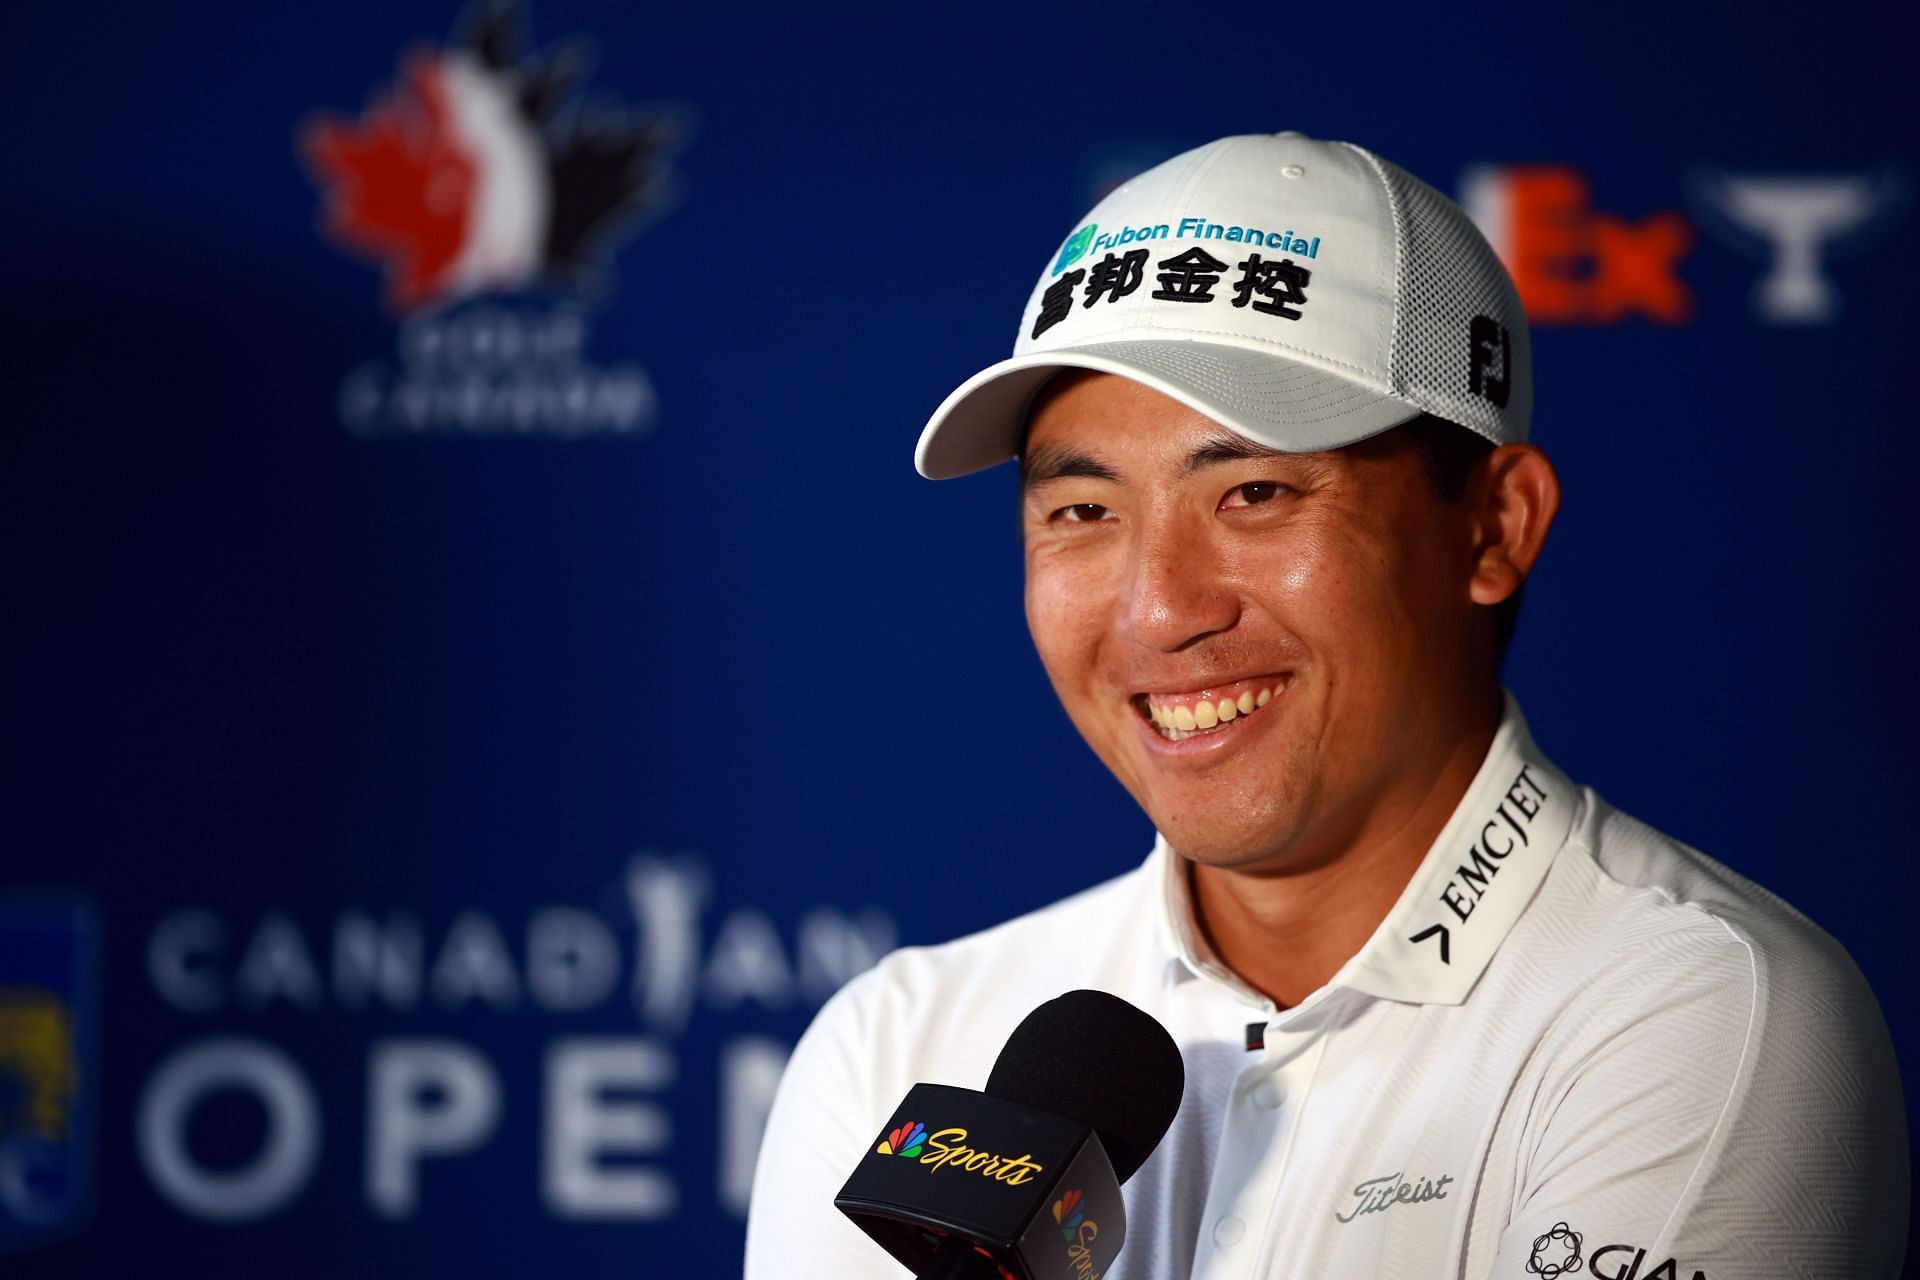 C.T. Pan takes the lead on a challenging leaderboard at RBC Canadian Open